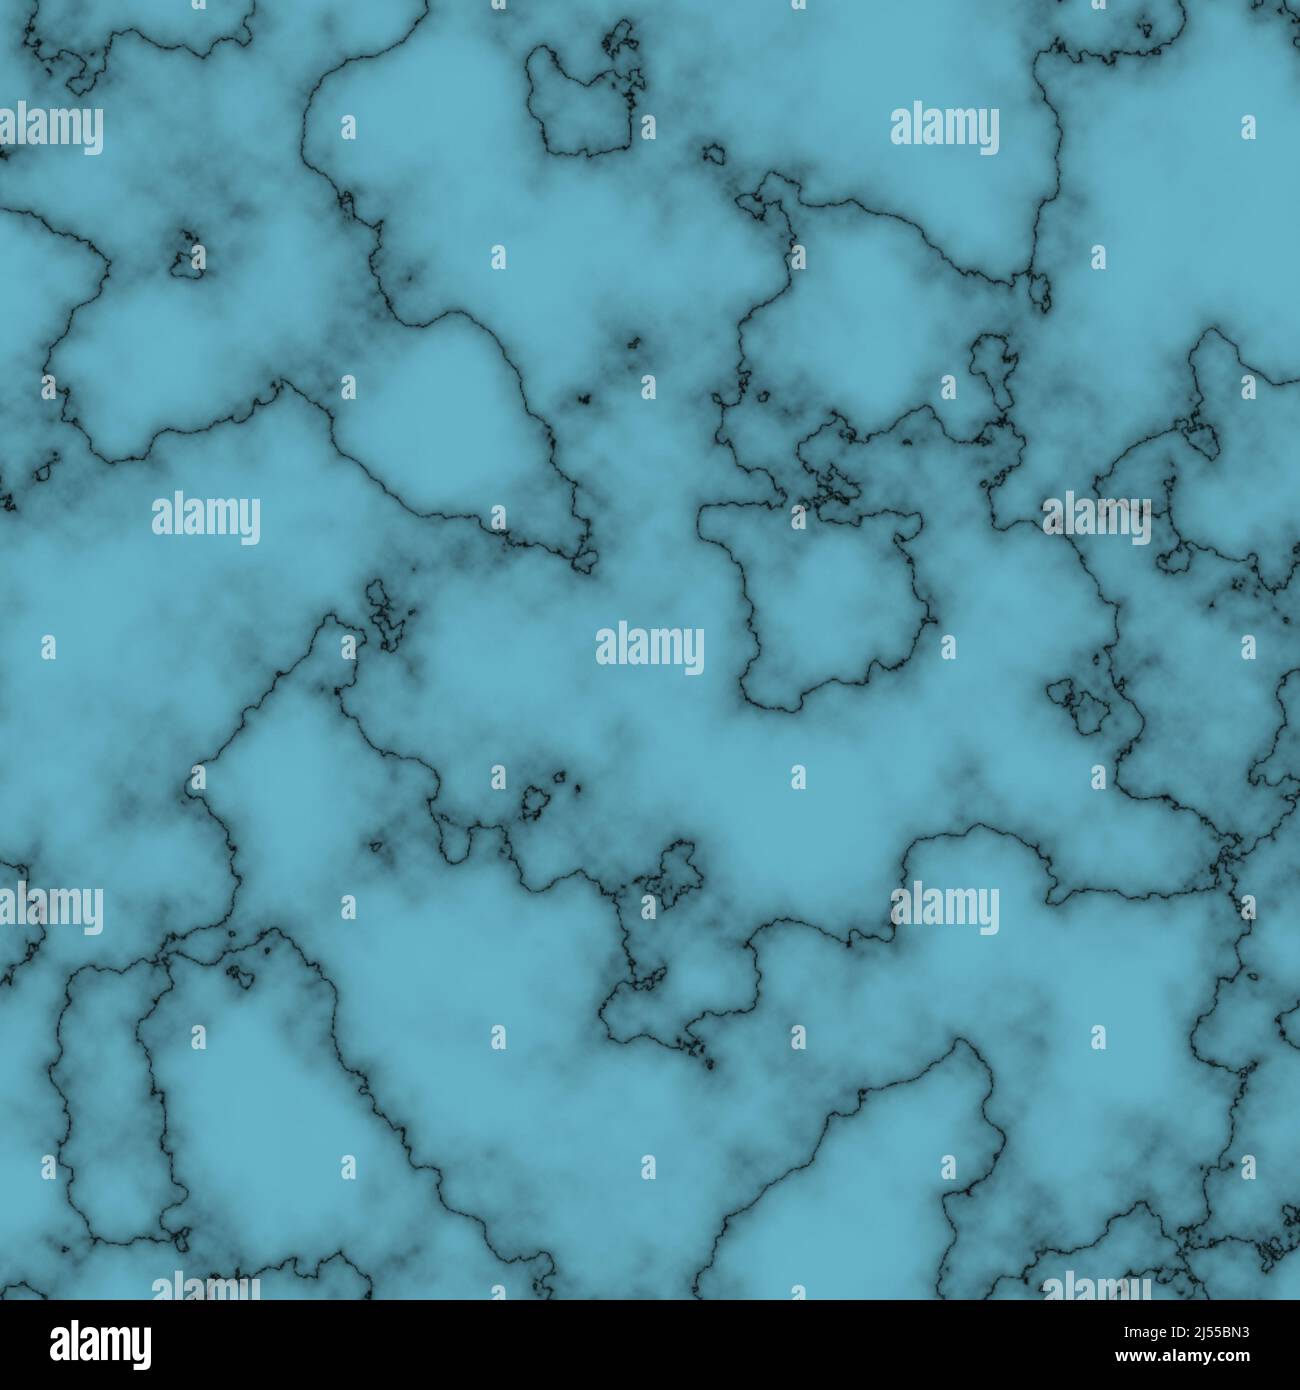 Turquoise blue marbling pattern background with dark gray granite texture in this design element. Stock Photo